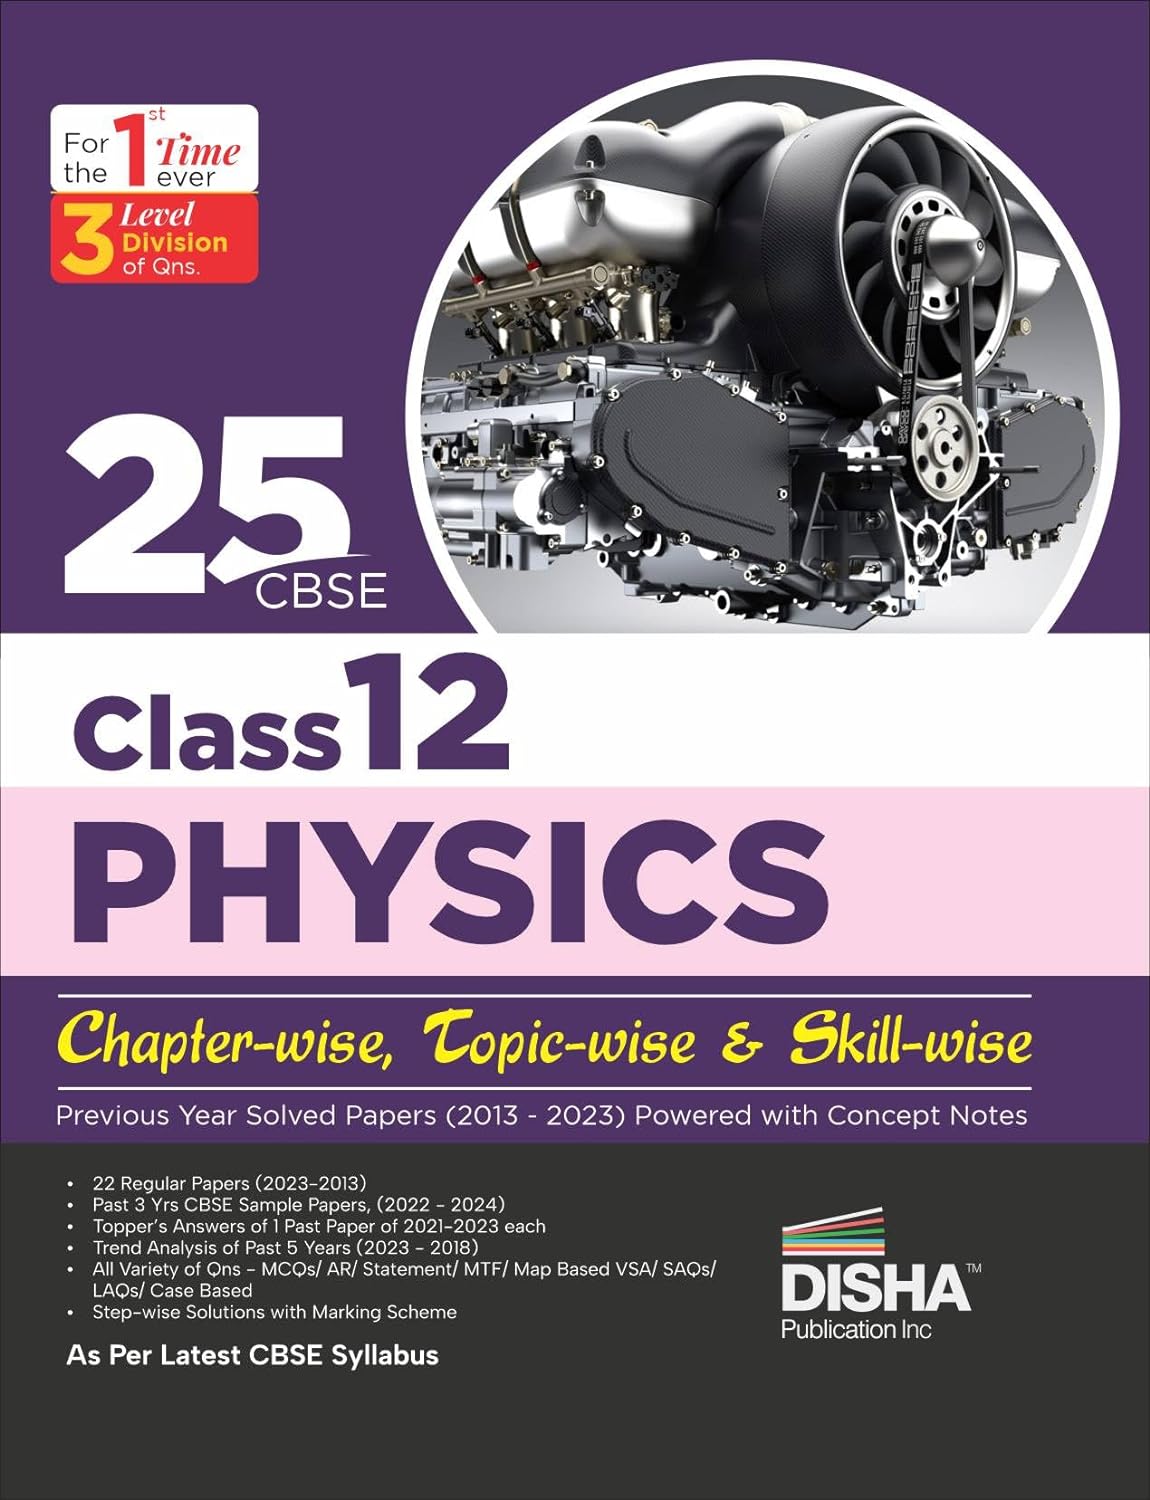 25 CBSE Class 12 Physics Chapter-wise, Topic-wise & Skill-wise Previous Year Solved Papers (2013 - 2023) powered with Concept Notes  Disha Experts is a team of most renowned and prolific content writers pioneering in School and Test Prep segments (Co